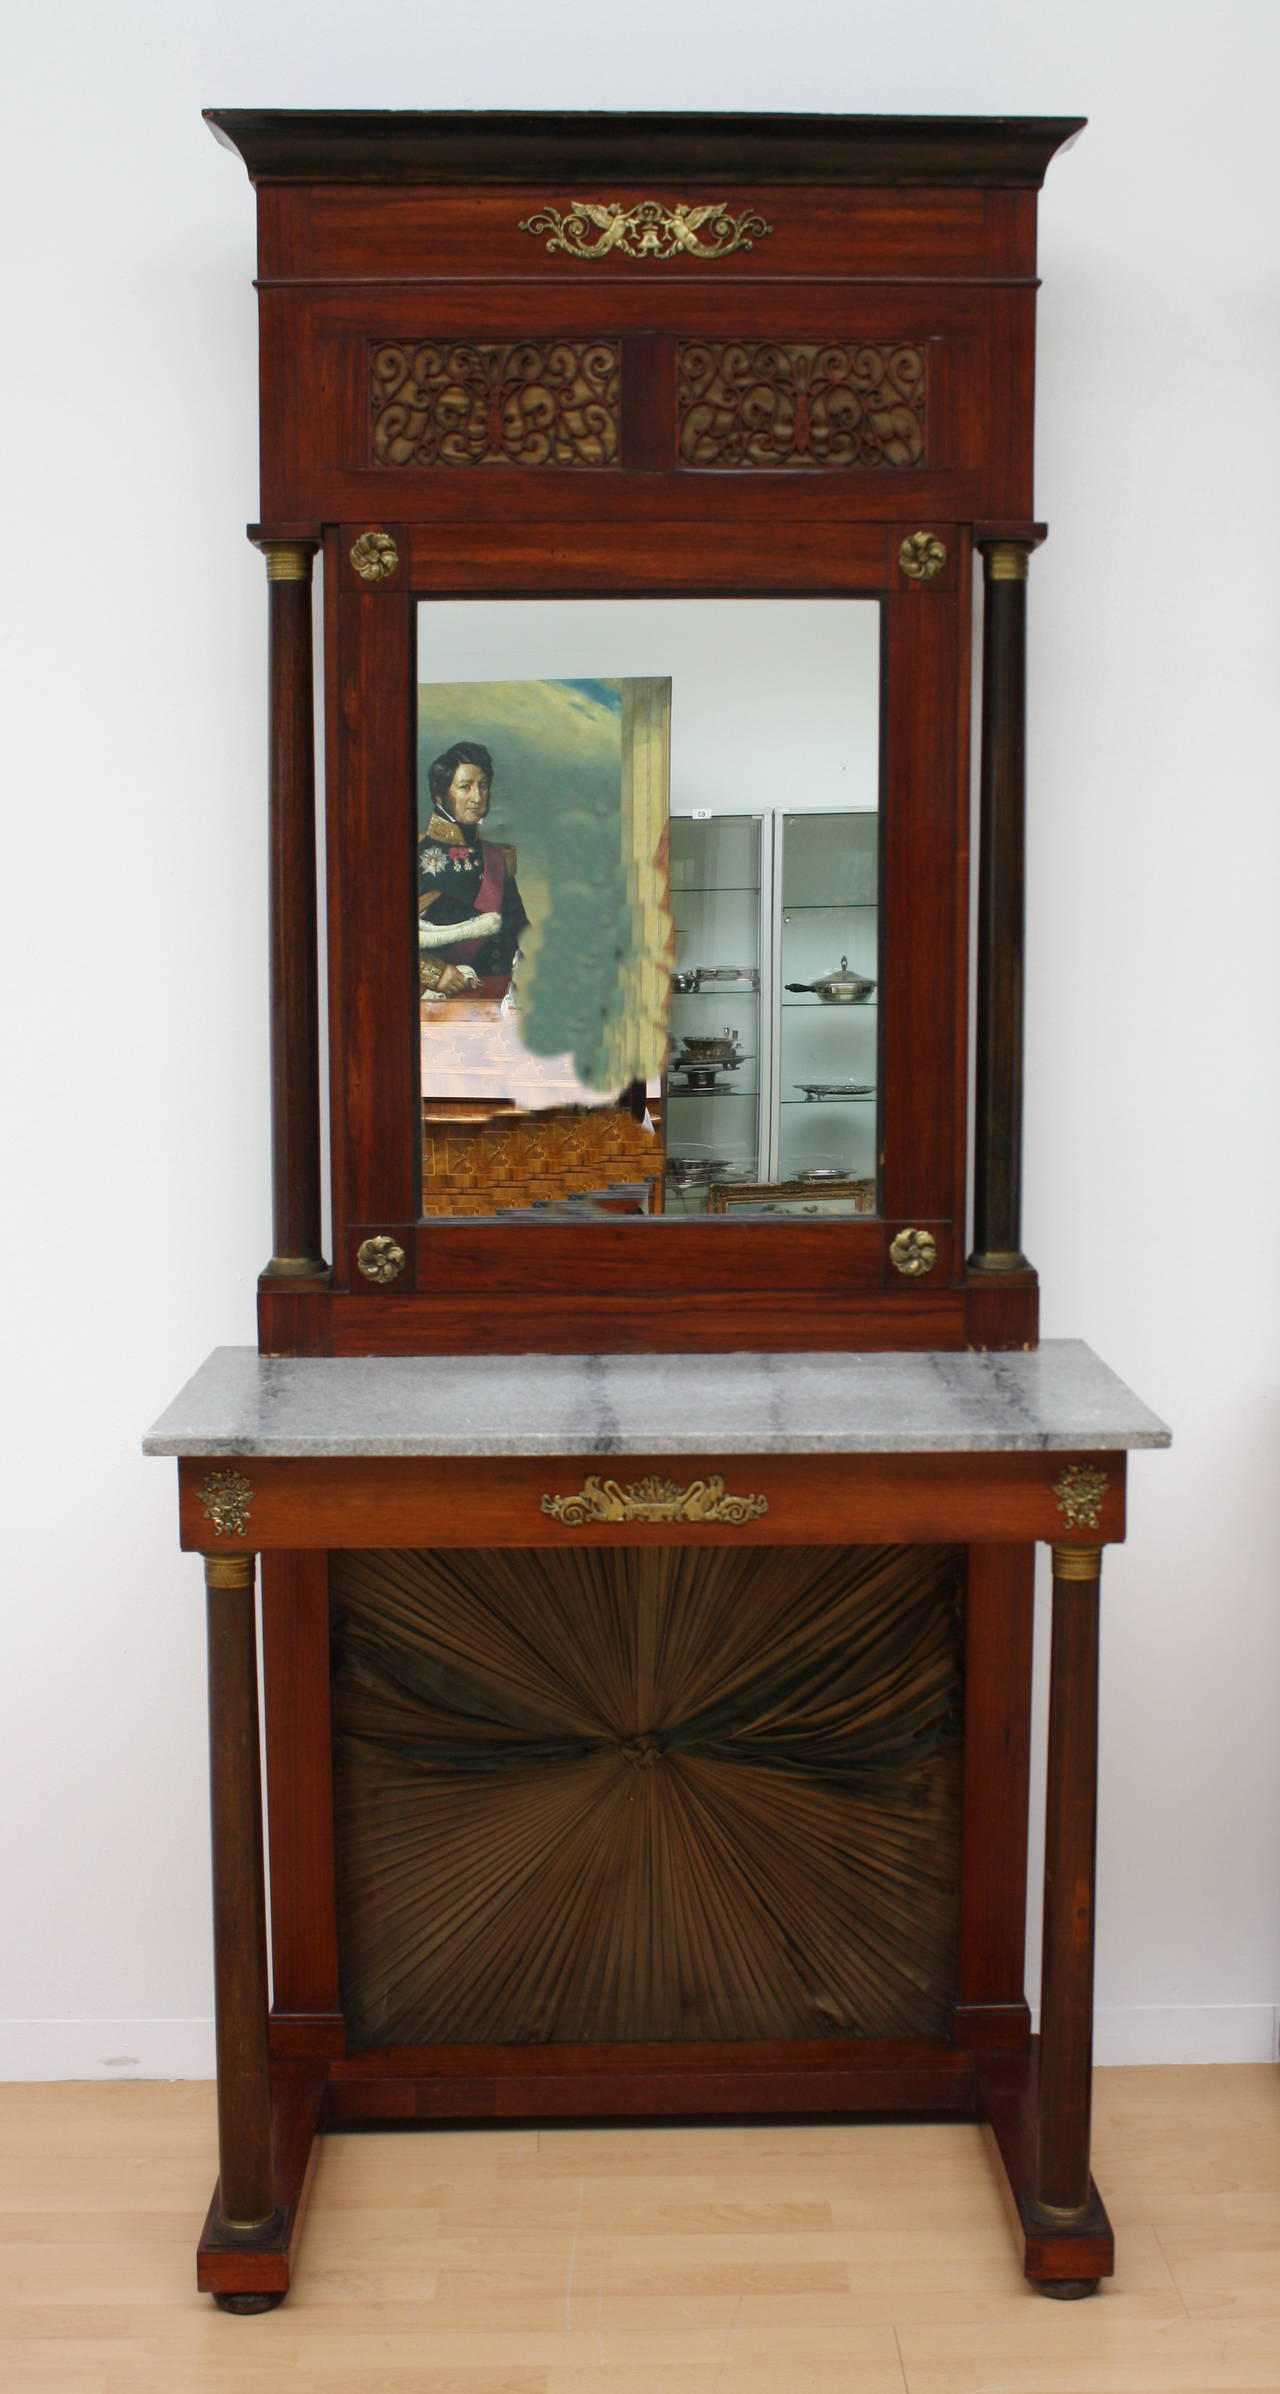 Gorgeous pair of Austrian Empire consoles with mirrors. Mahogany and nutwood consoles with grey marble tops, back with sun shaped shirred fabric. Columns and front with finely modelled bronze Mounts. Above mirrors openworked carved, backed with